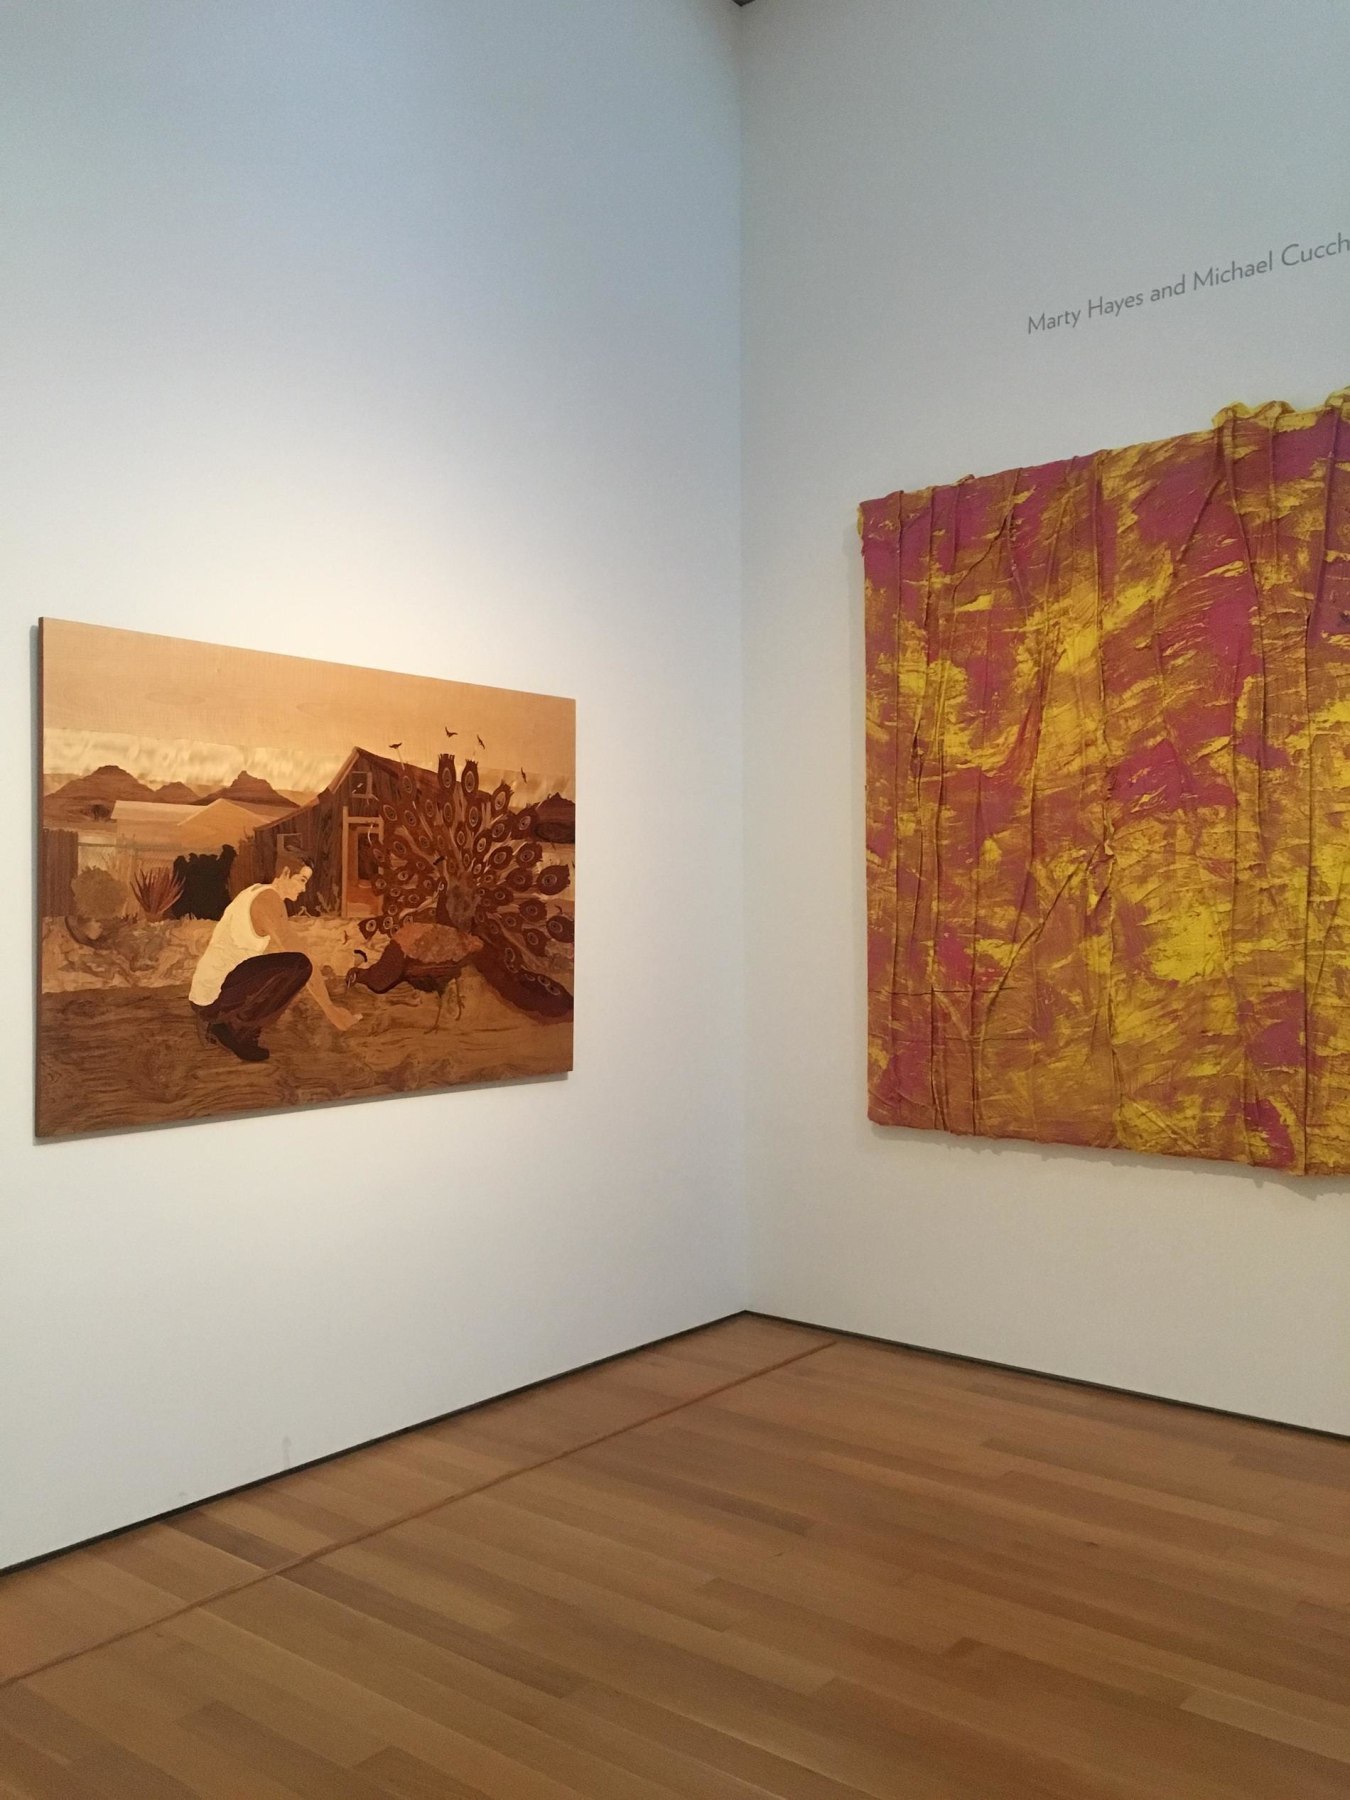 Image of ALISON ELIZABETH TAYLOR's Era of Argus,&nbsp;2007 next to another artwork